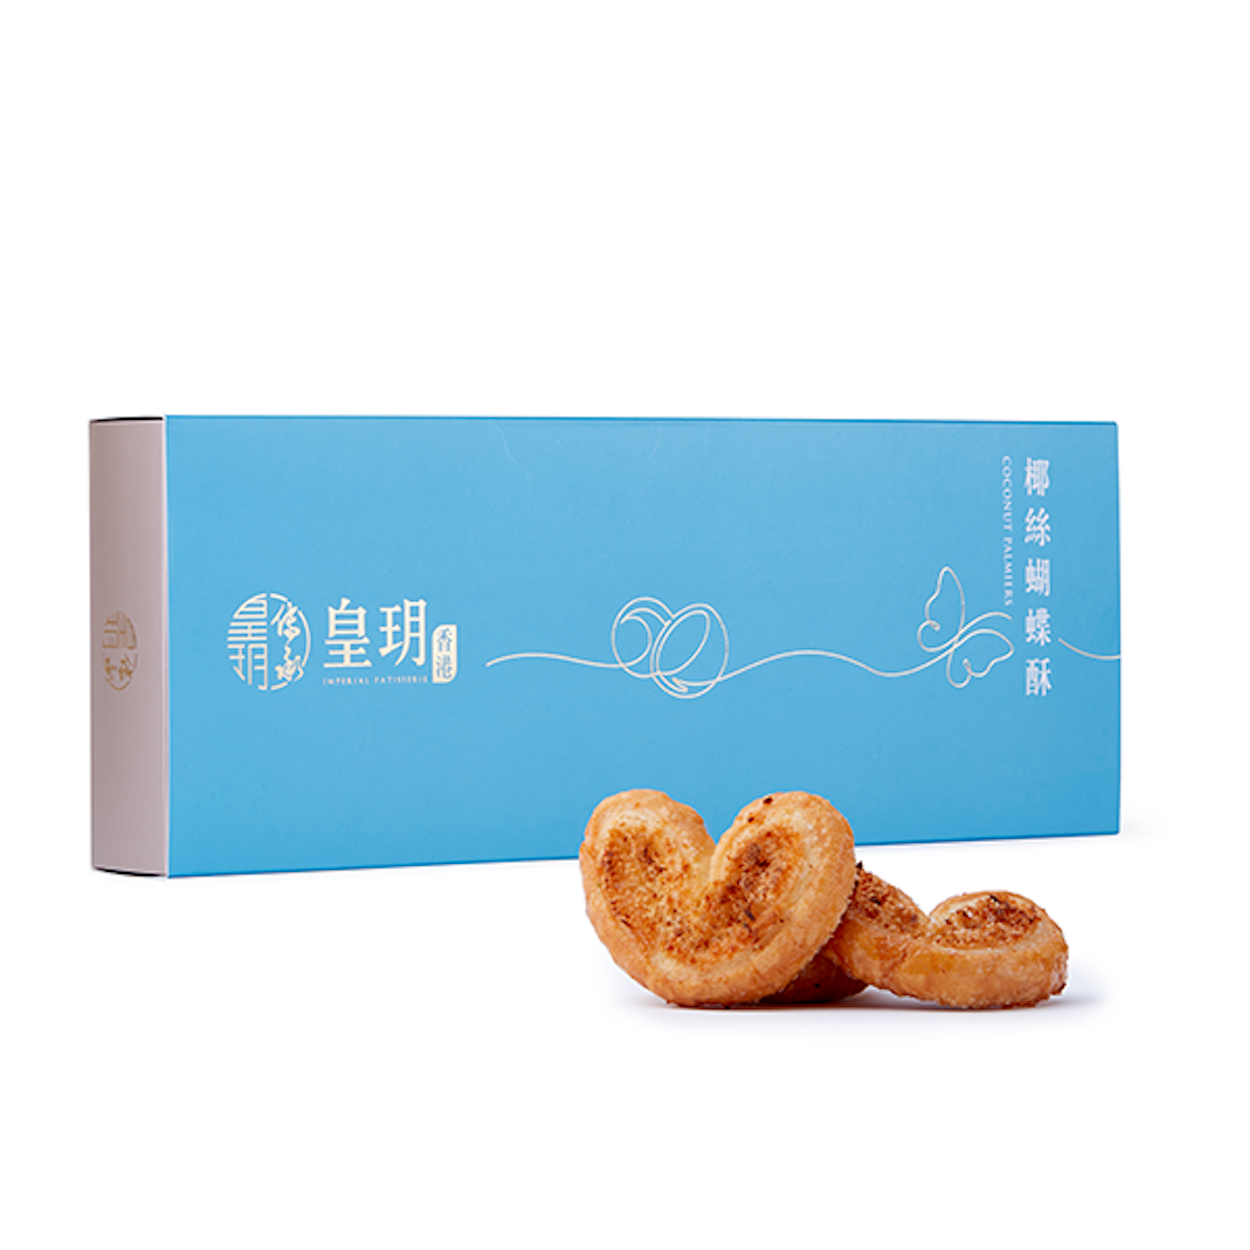 Imperial Patisserie Coconut Palmiers Delight Gift Set  皇玥 椰絲蝴蝶酥精裝禮盒